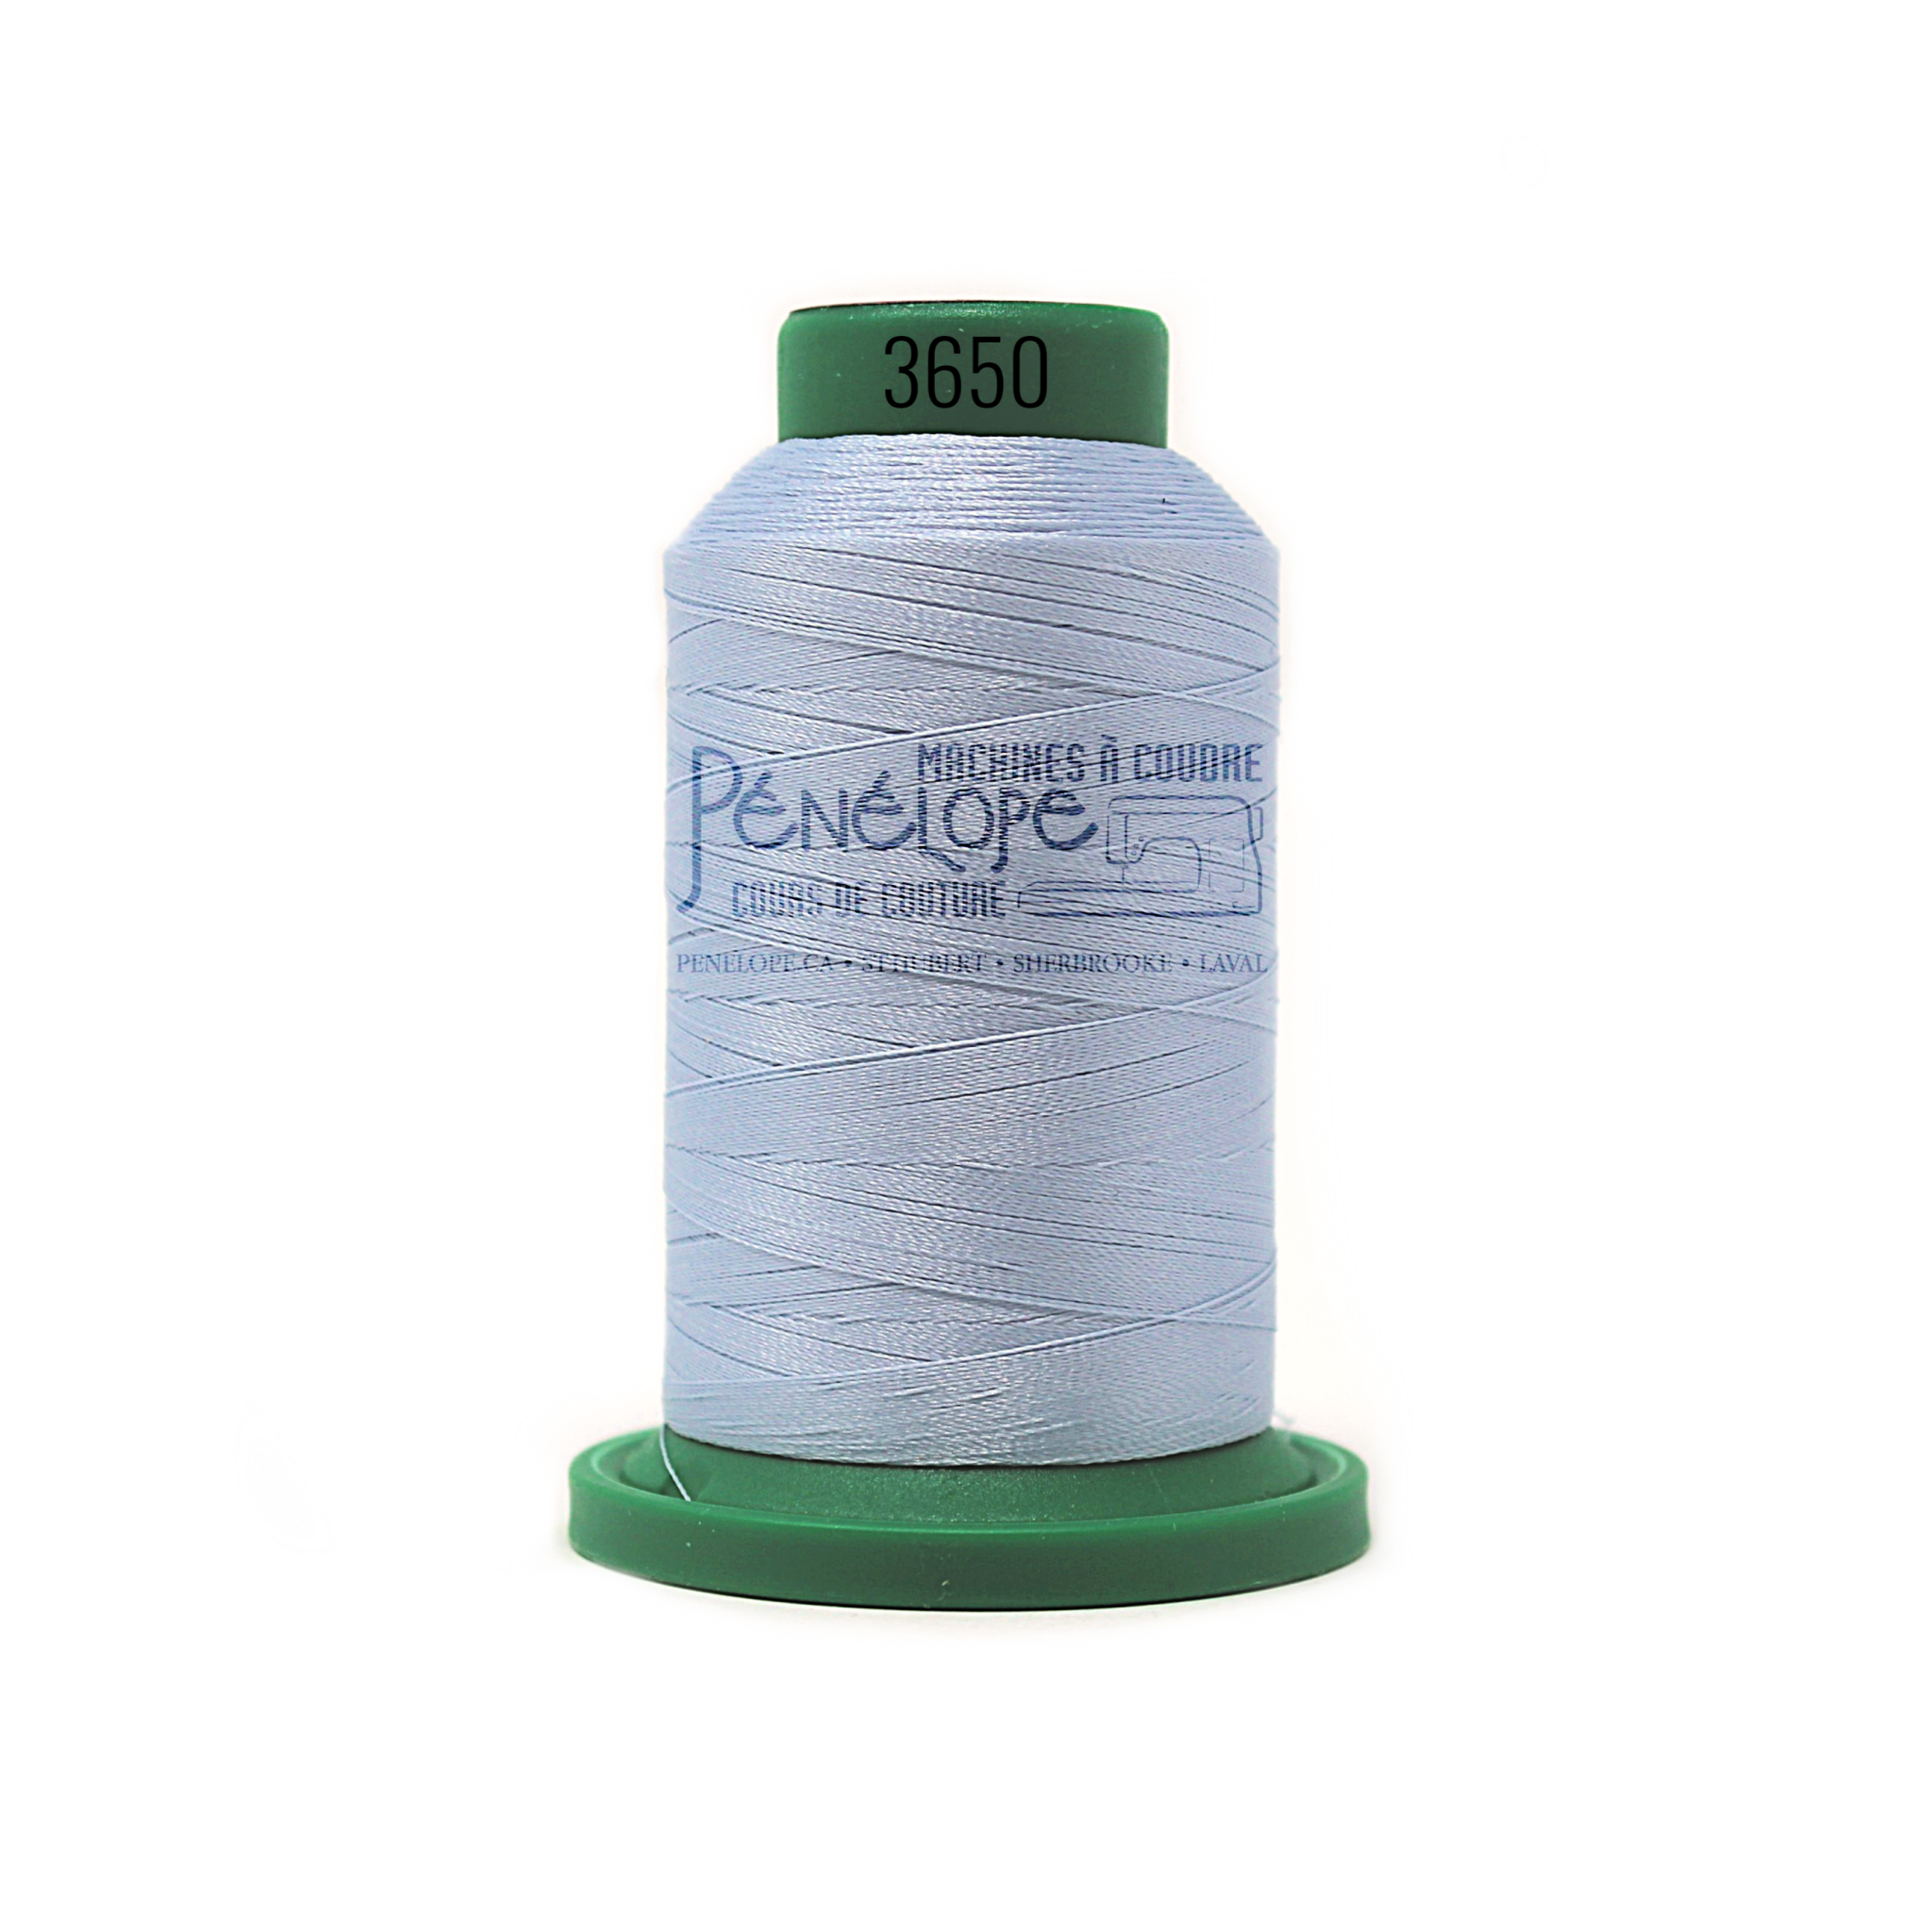 Isacord Isacord sewing and embroidery thread 3650